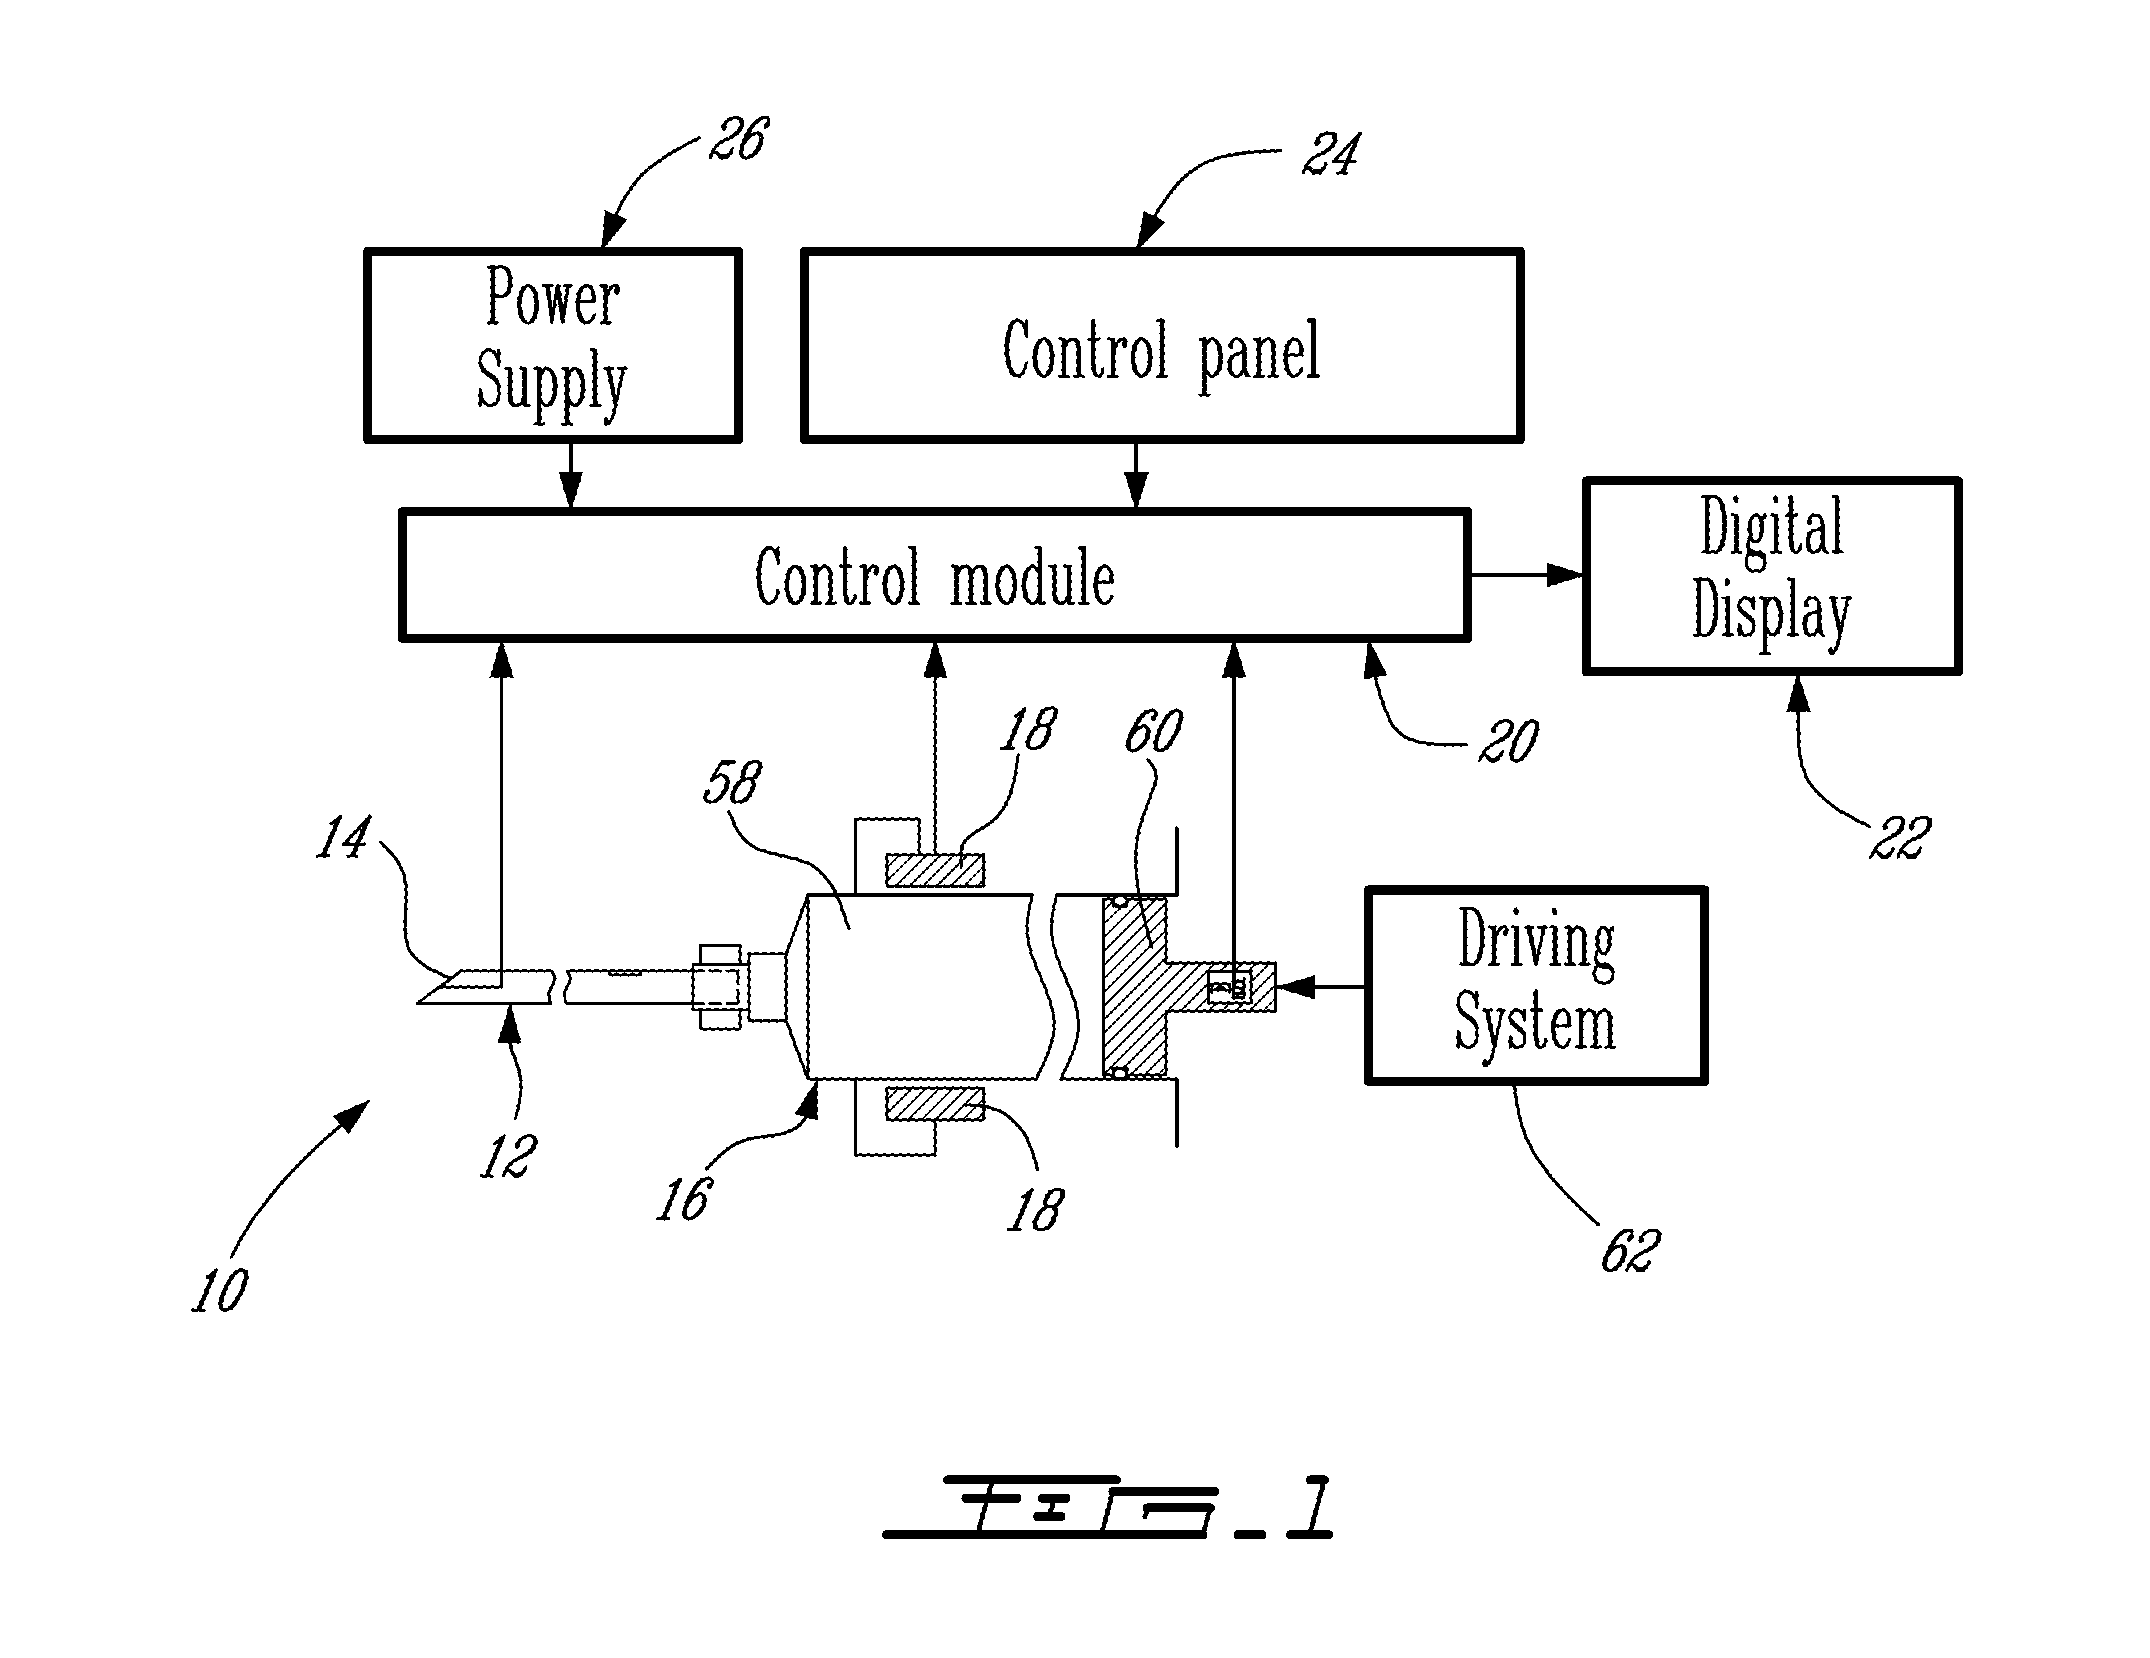 Integrated cement delivery system for bone augmentation procedures and methods